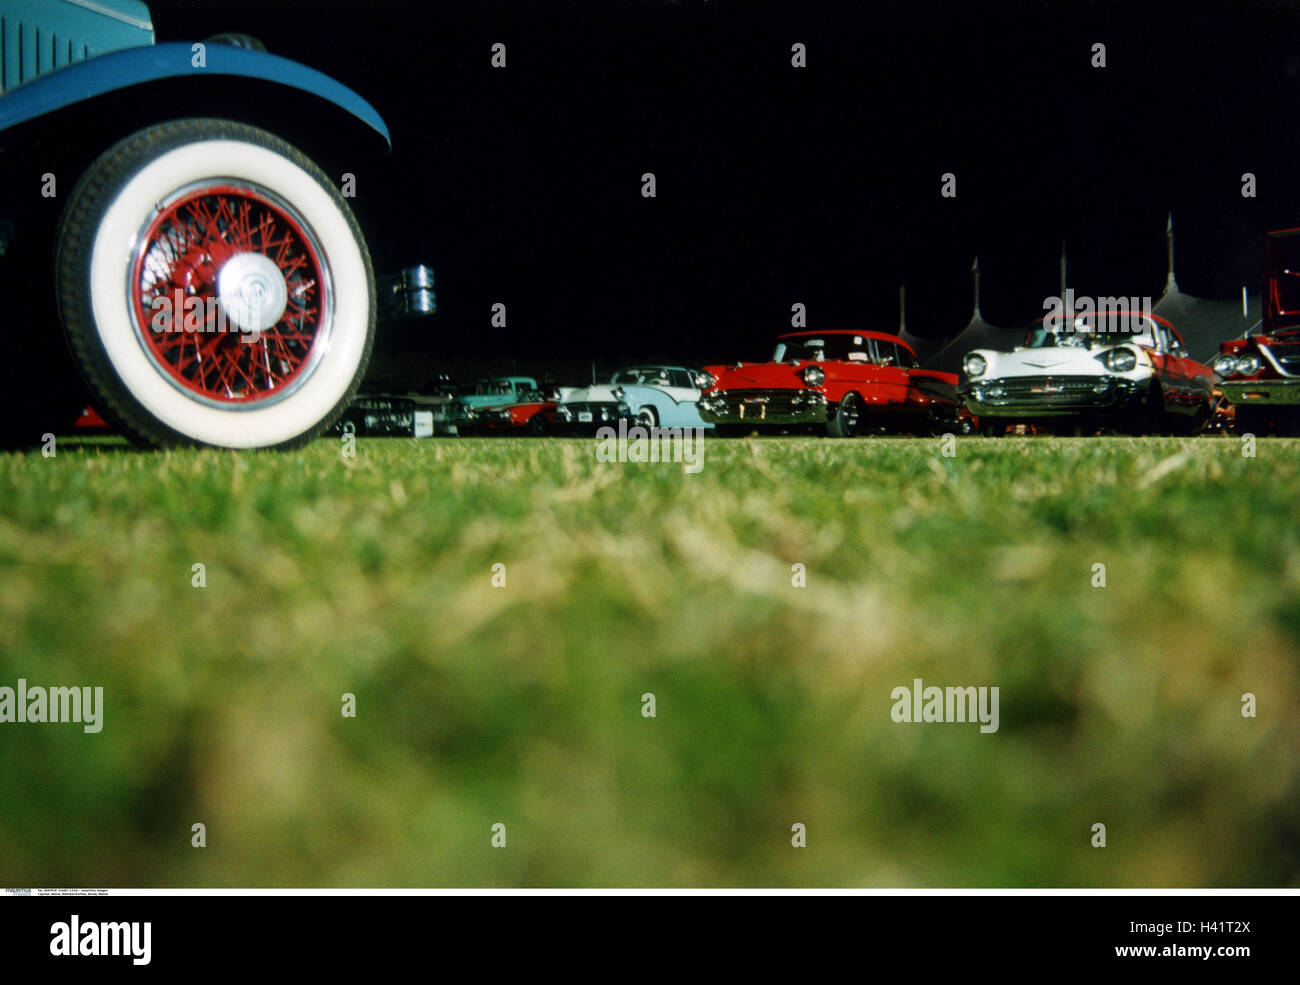 Meadow, old-timer meetings, detail, evening,   Lawns, vehicles, Pkw's, cars, old-timers, valuable, collectibles, prestige, wealth, hobby, tires, Phonix 2003, old-timer auction Stock Photo